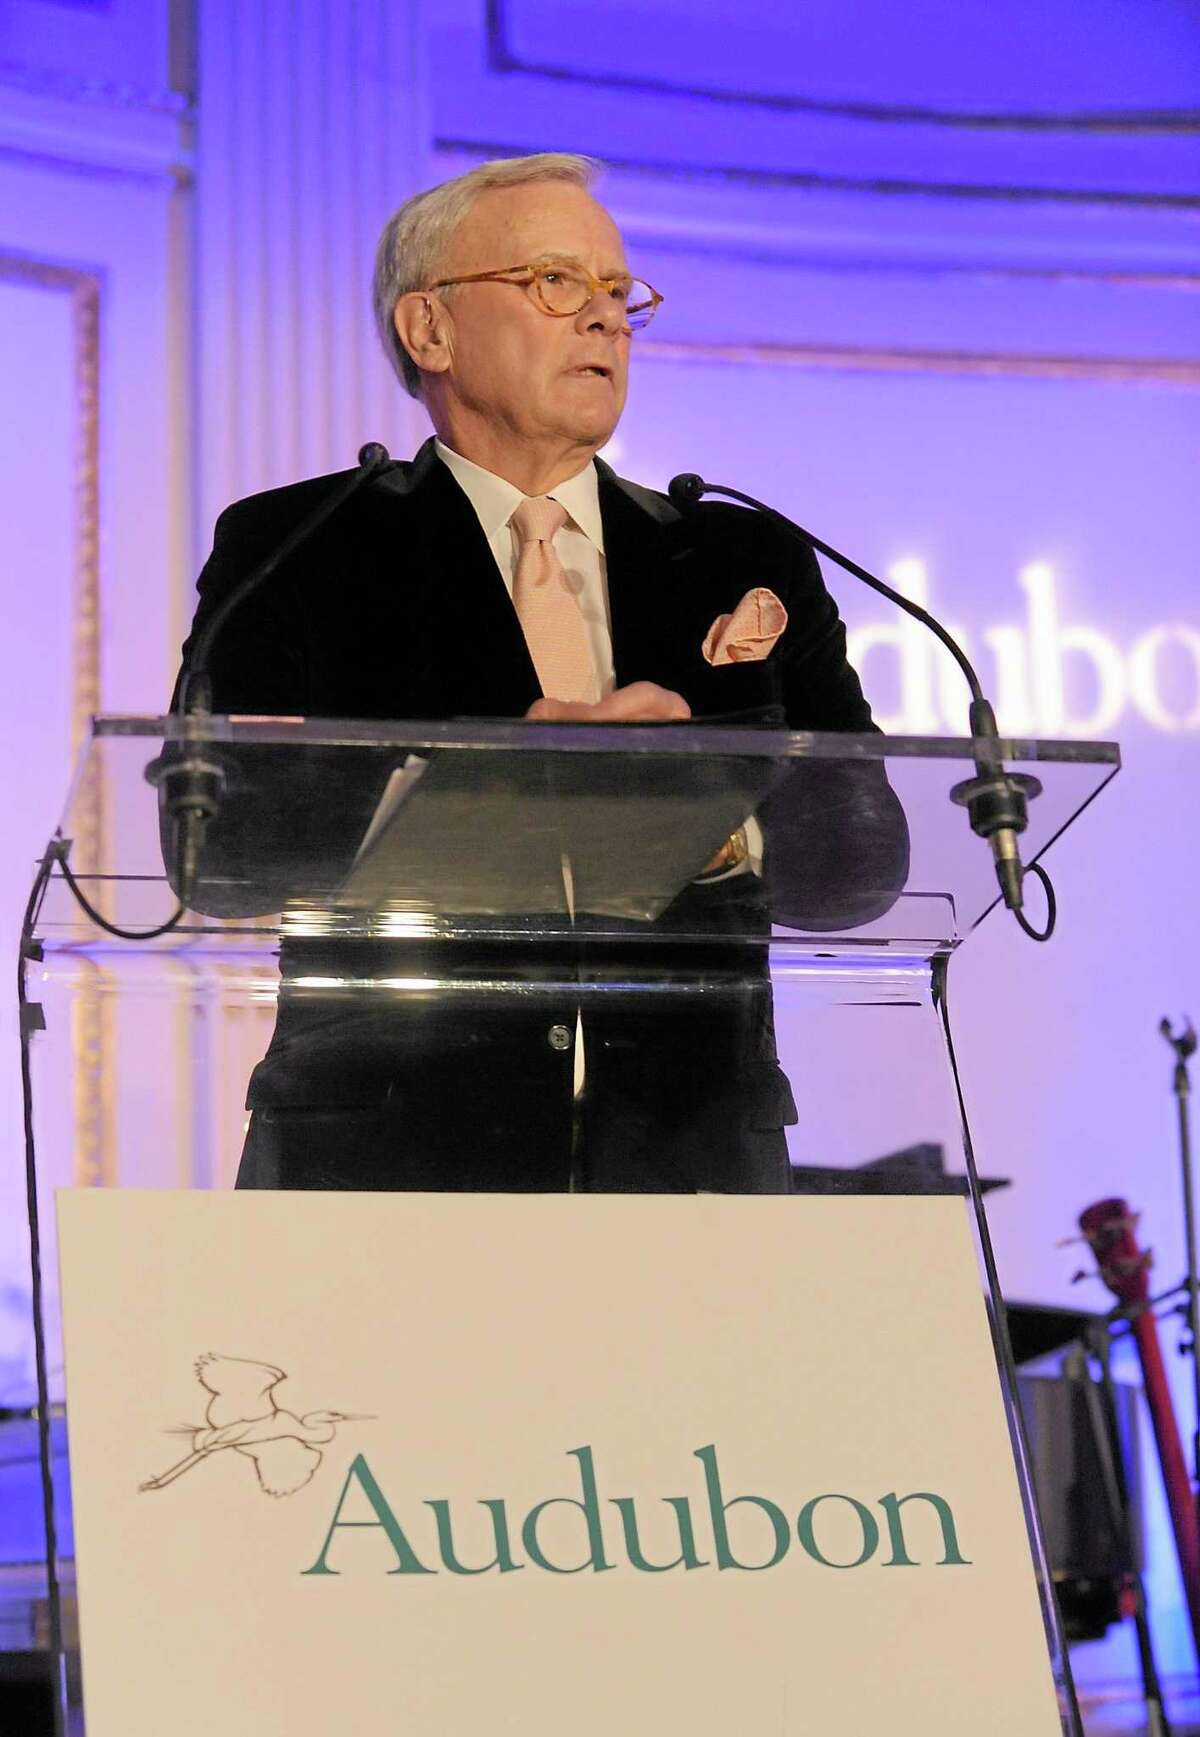 Tom Brokaw hosts The National Audubon Society's first gala to jointly award the Audubon Medal and the inaugural Dan W. Lufkin Prize for Environmental Leadership, Thursday, Jan. 17, 2013, in New York. (Photo by Diane Bondareff/Invision for The National Audubon Society/AP Images)